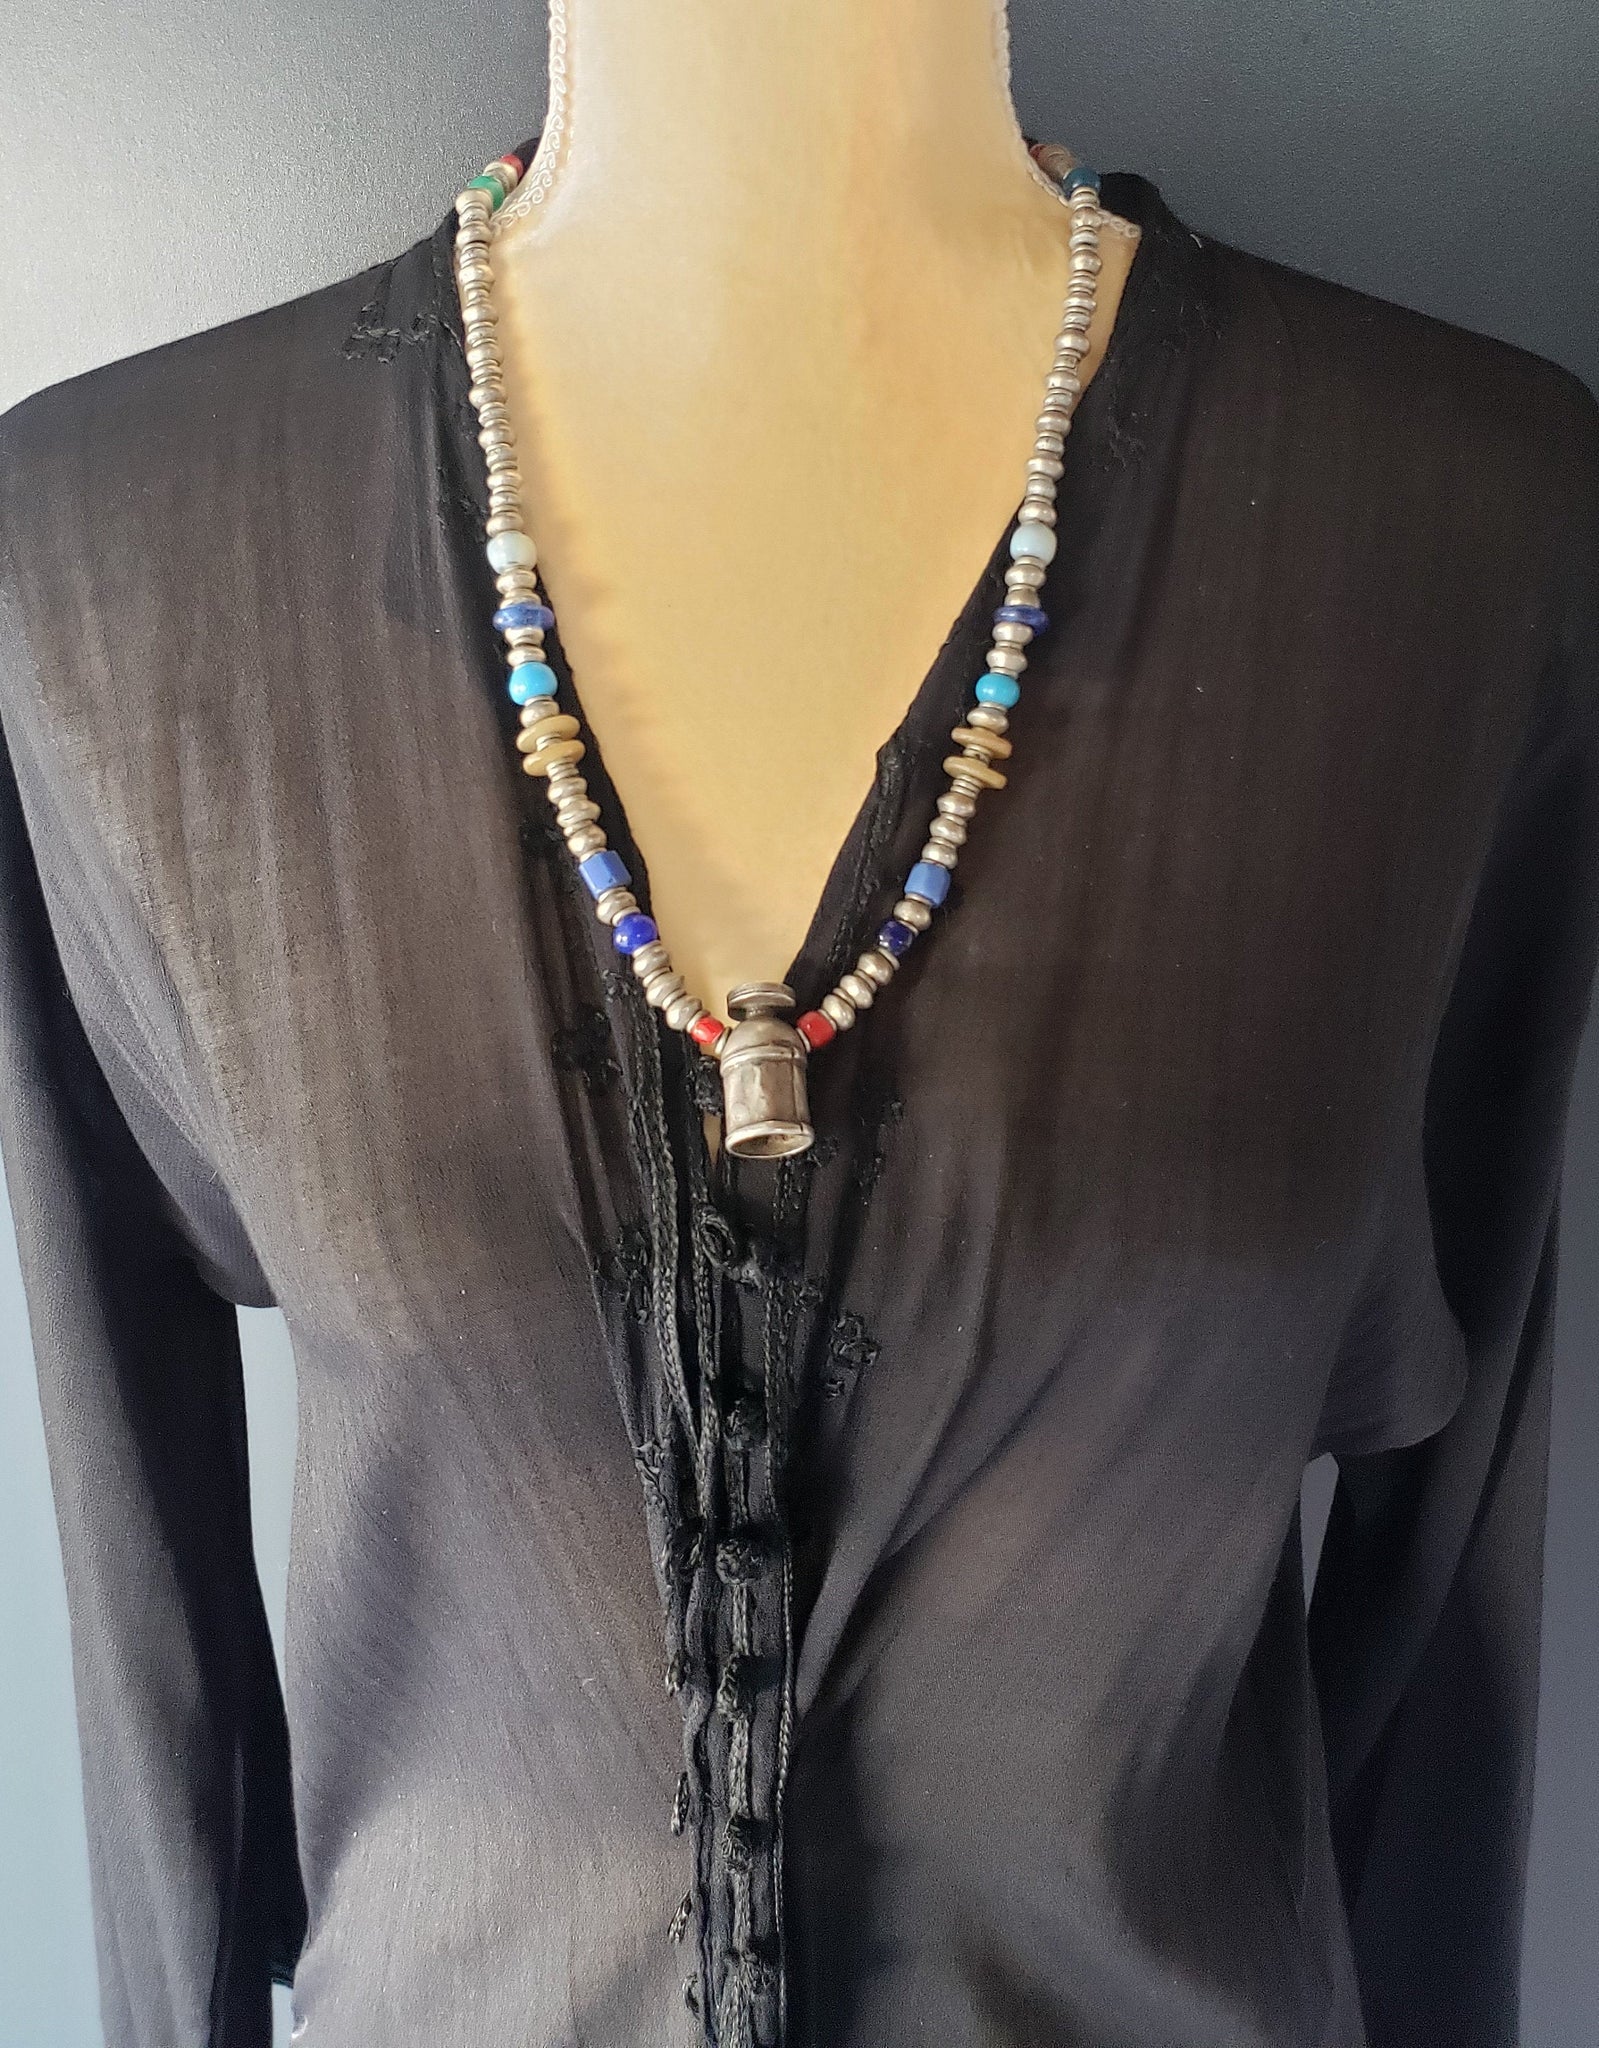 Beaded Maasai Statement Necklace – The Africa within me